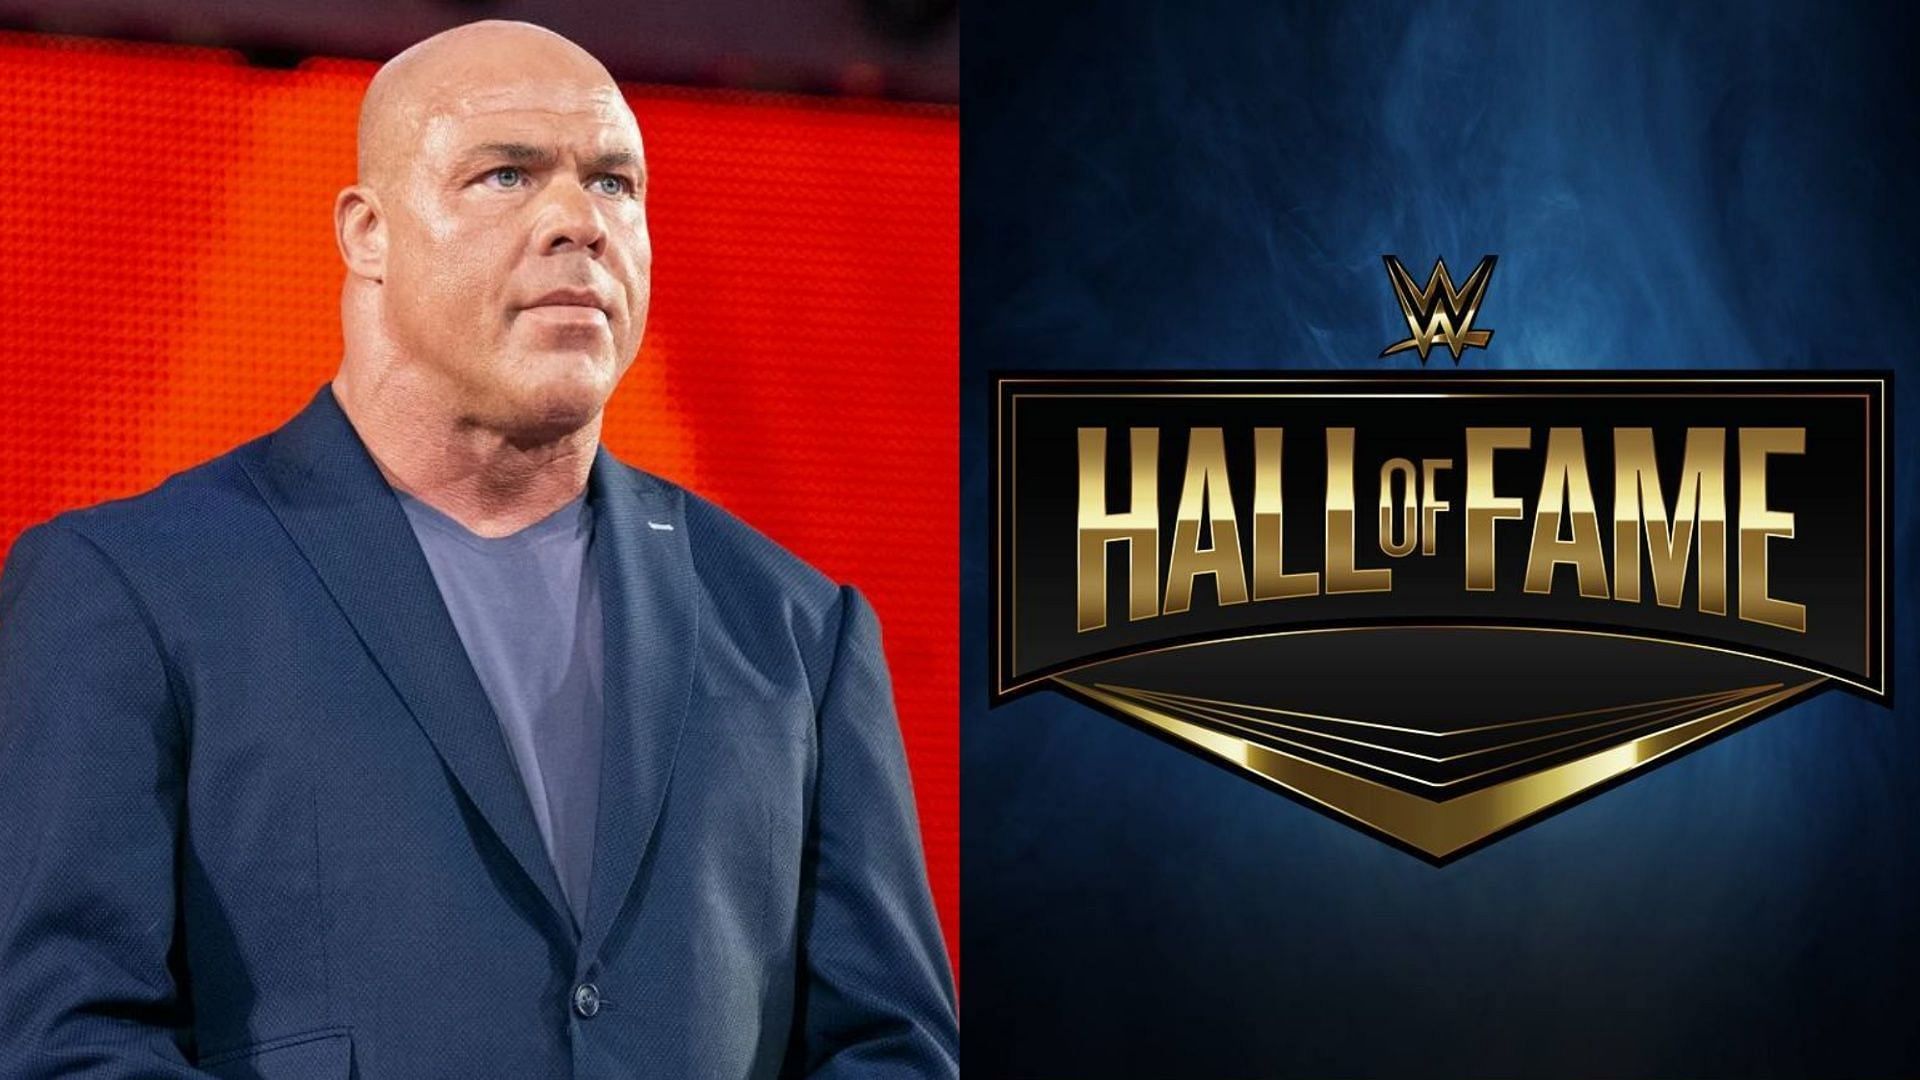 Kurt Angle was inducted to the WWE Hall of Fame in 2017.